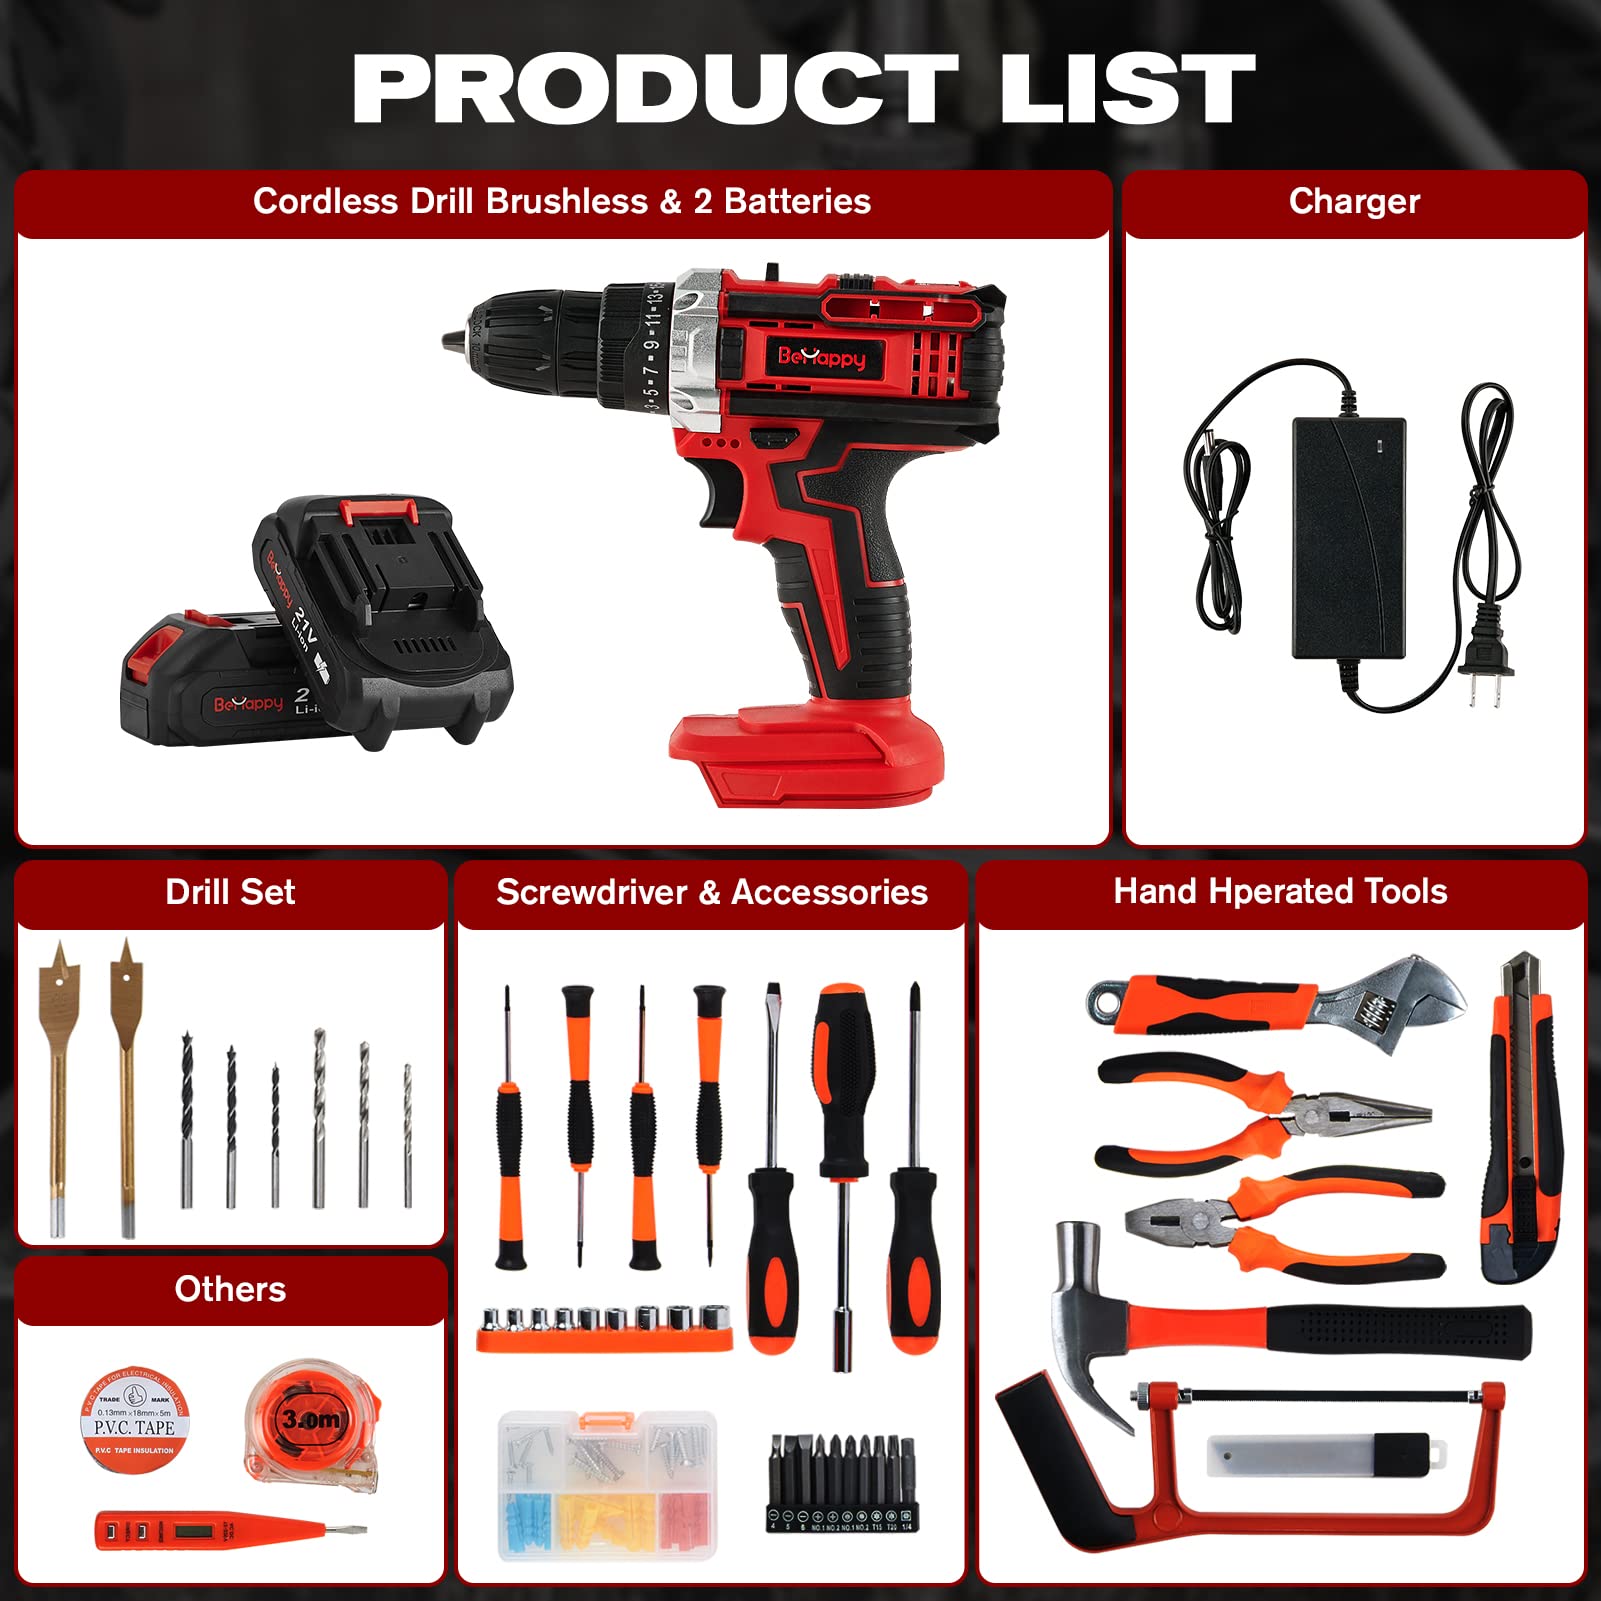 Behappy 43 Piece Power Tool Set Combo Kit with 21V Cordless Power Drill Driver, Home Tool Kit Set with DIY Hand Accessories Tool Kits in Storage Case